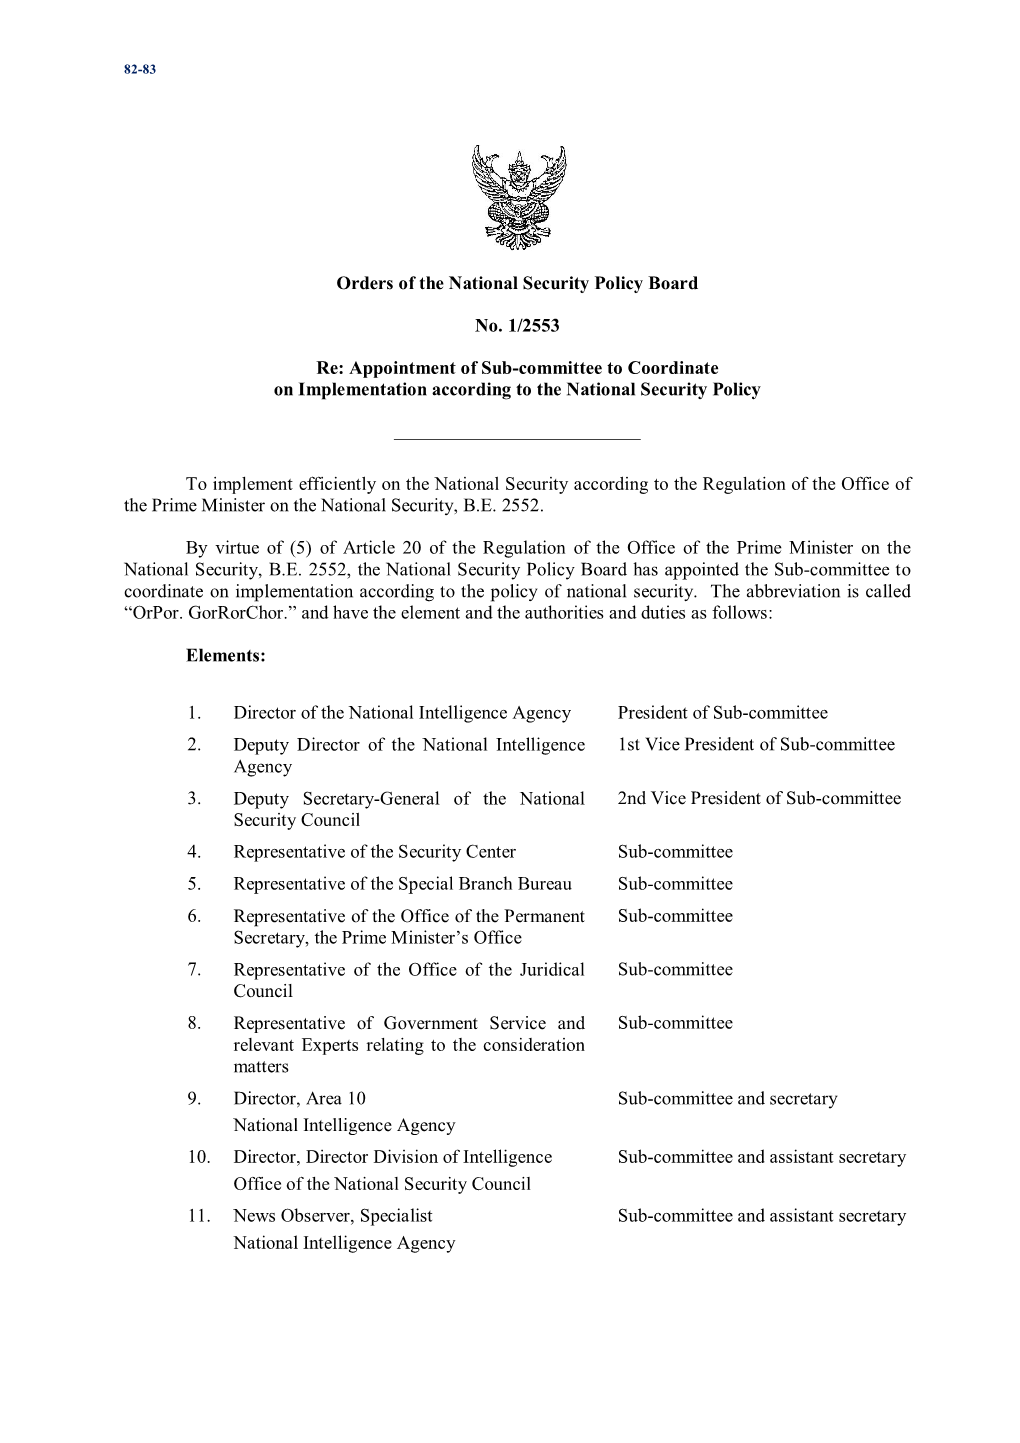 Orders of the National Security Policy Board No. 1/2553 Re: Appointment